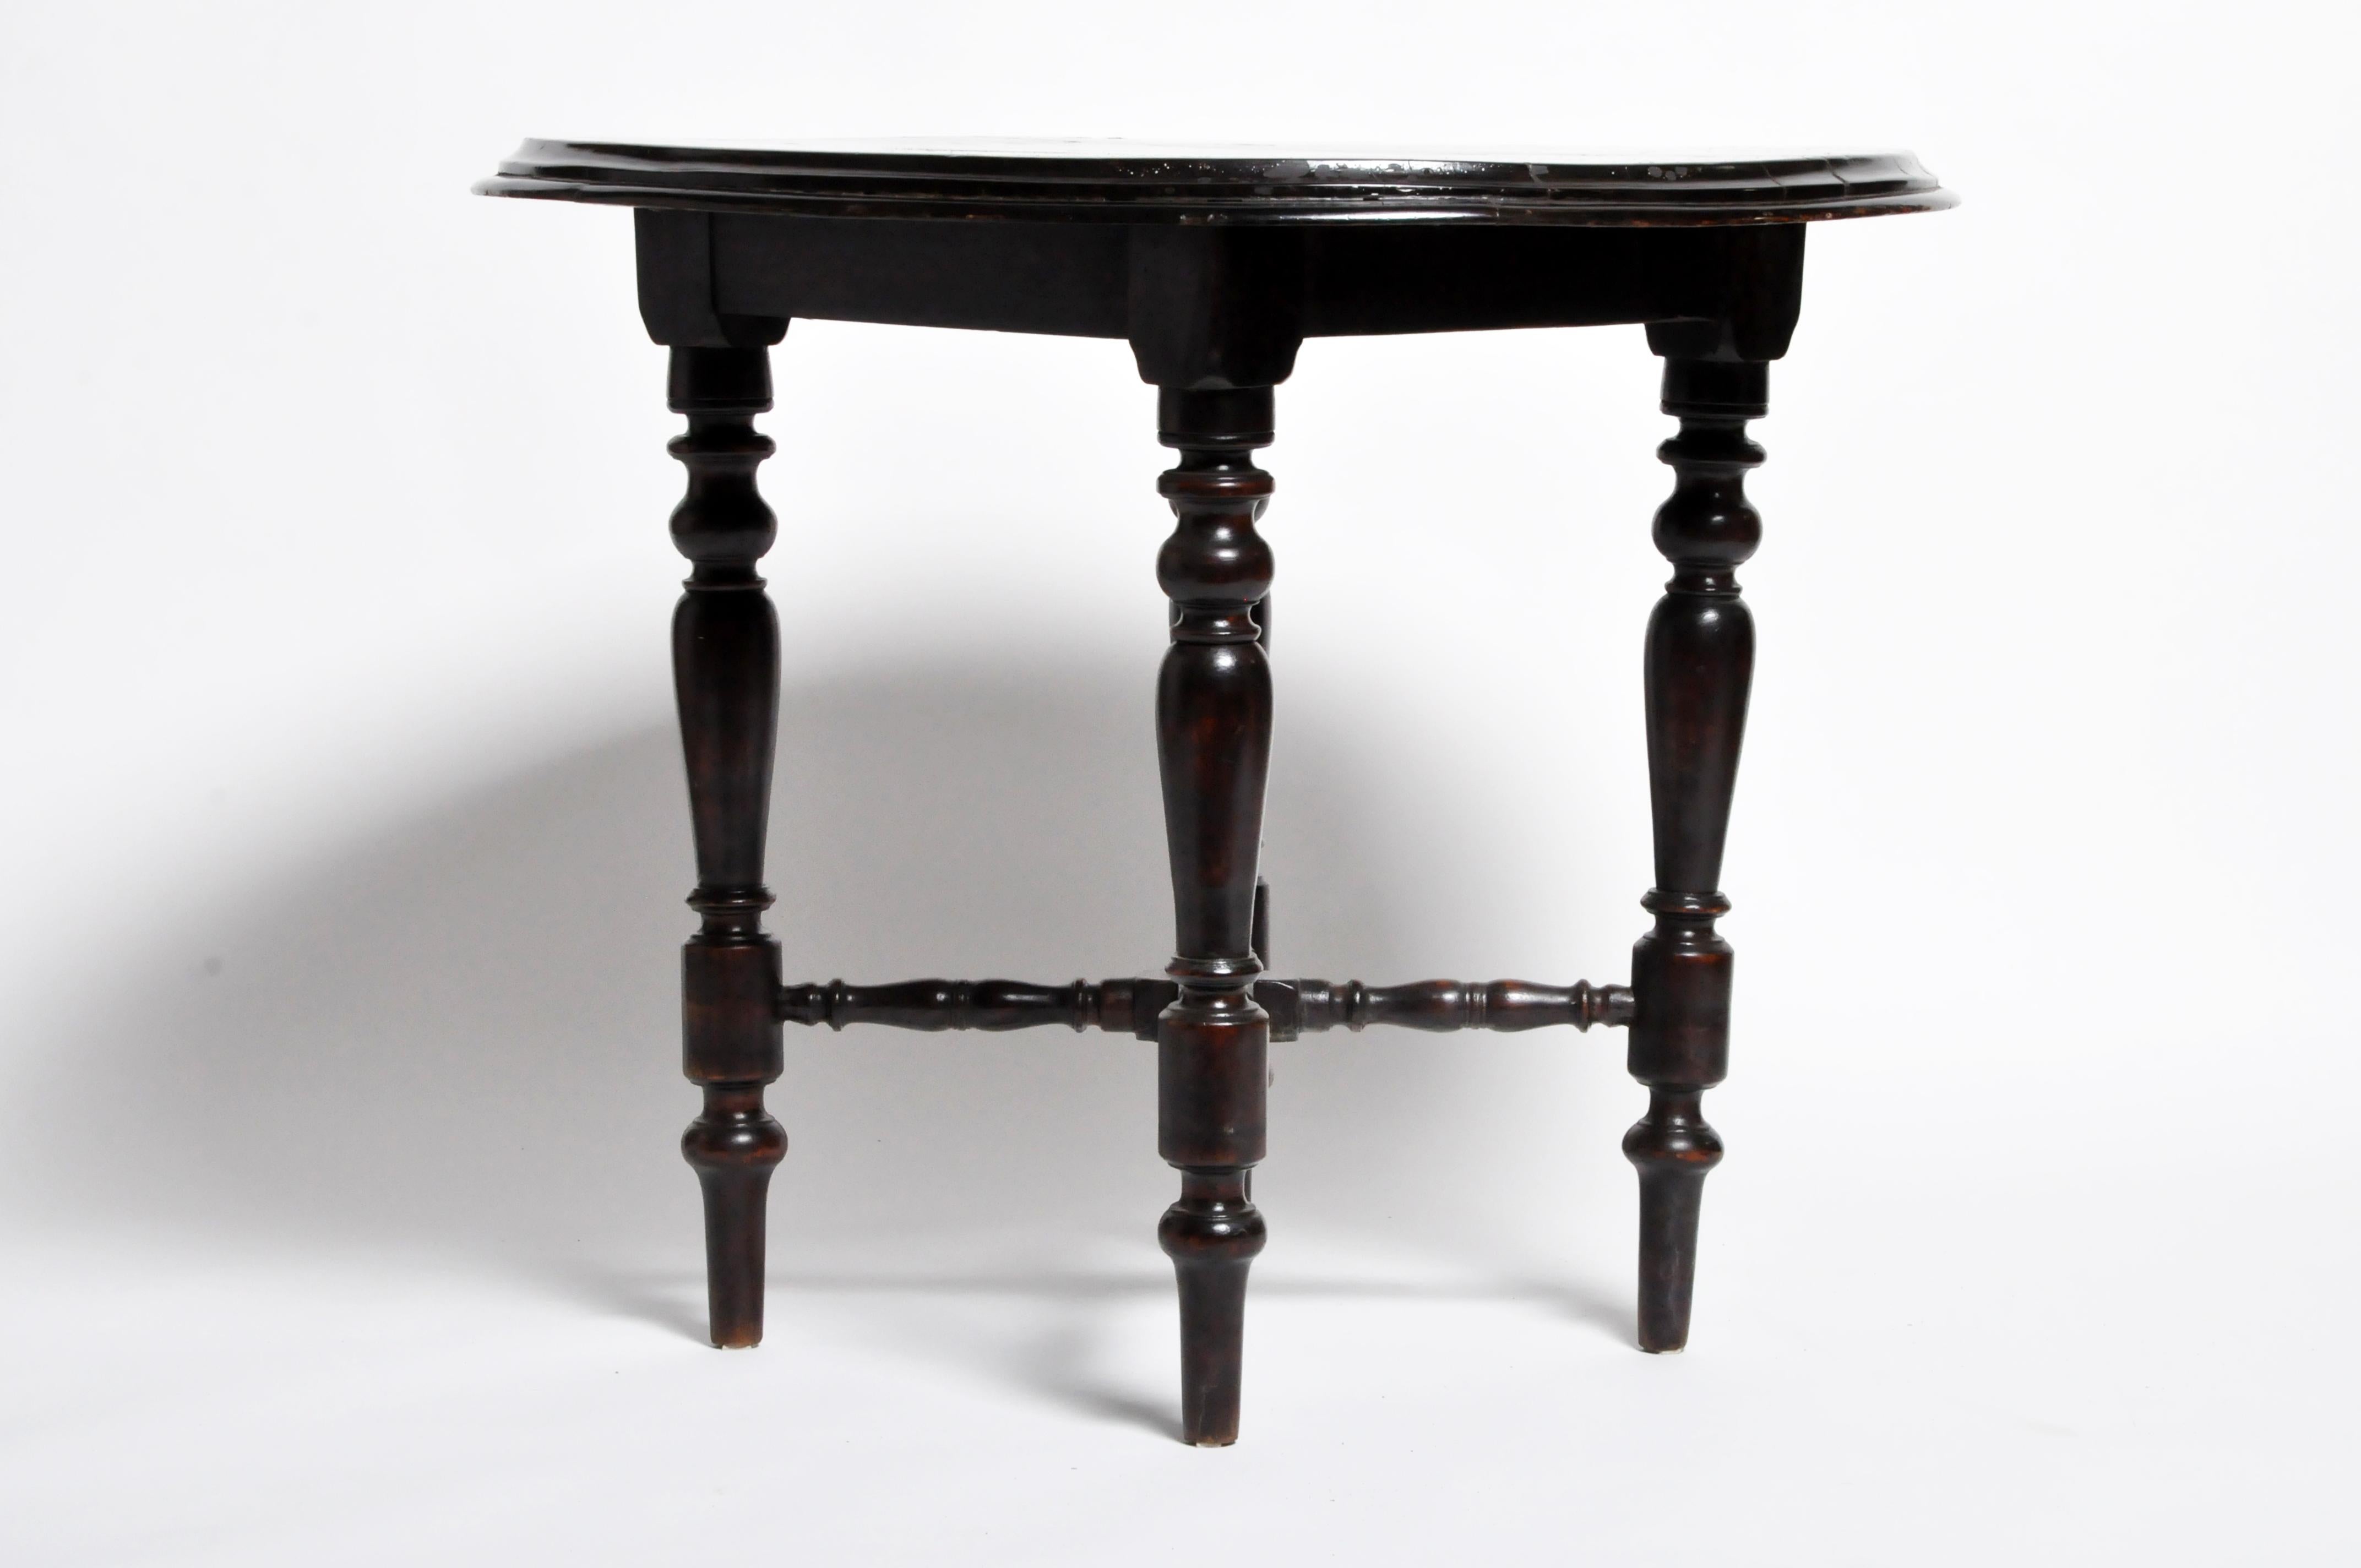 This handsome British Colonial round table was found in Northern Thailand but originally from Rangoon, Burma. It is made from teak wood with finished black lacquer and dates to about 1920 or earlier.  This is a good example of 